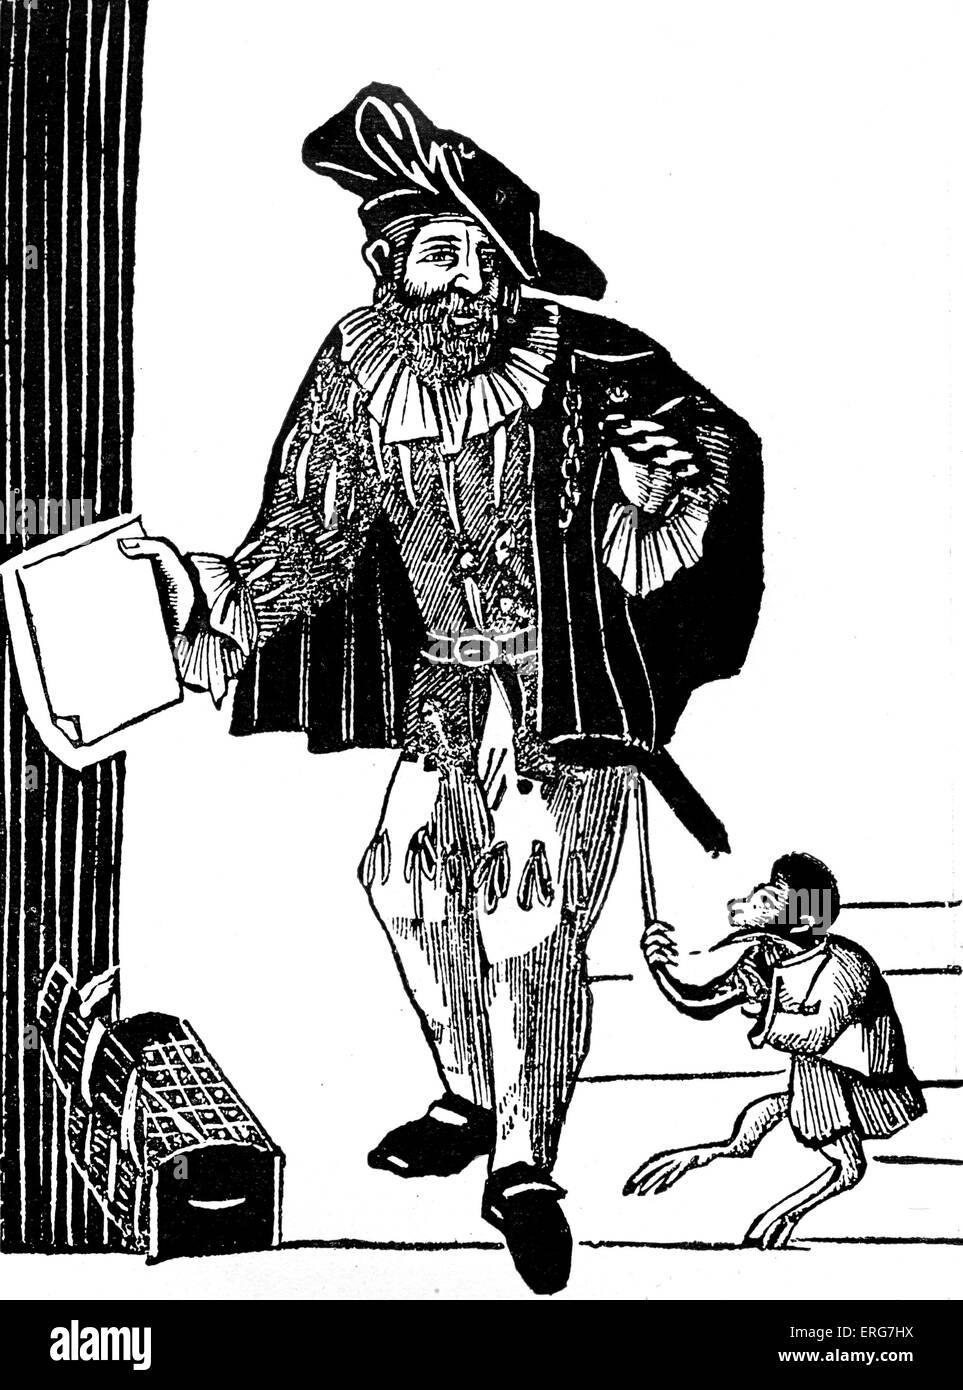 Mountebank of Old London, from a 17th century woodcut.  A fradulent medical practitioner. Stock Photo